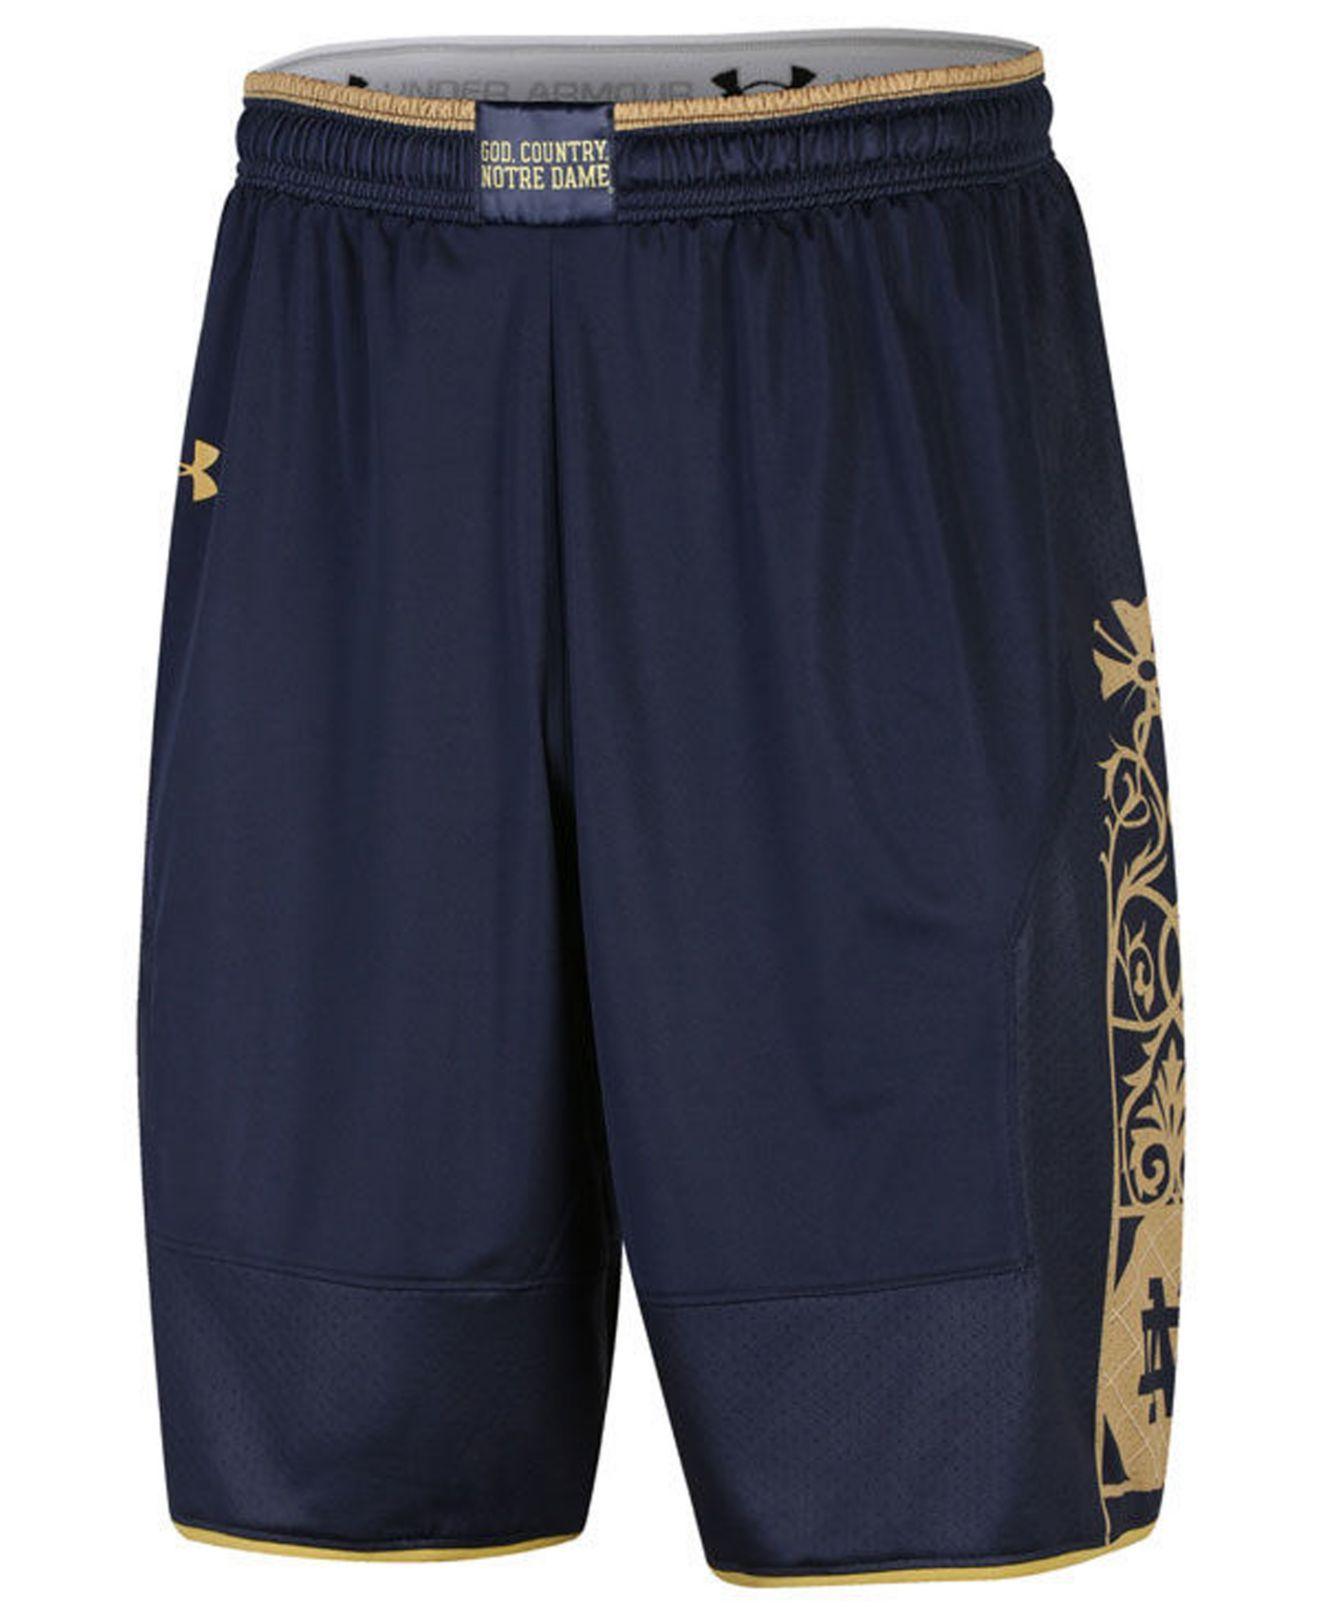 Under Armour Notre Dame Fighting Irish Replica Basketball Shorts in